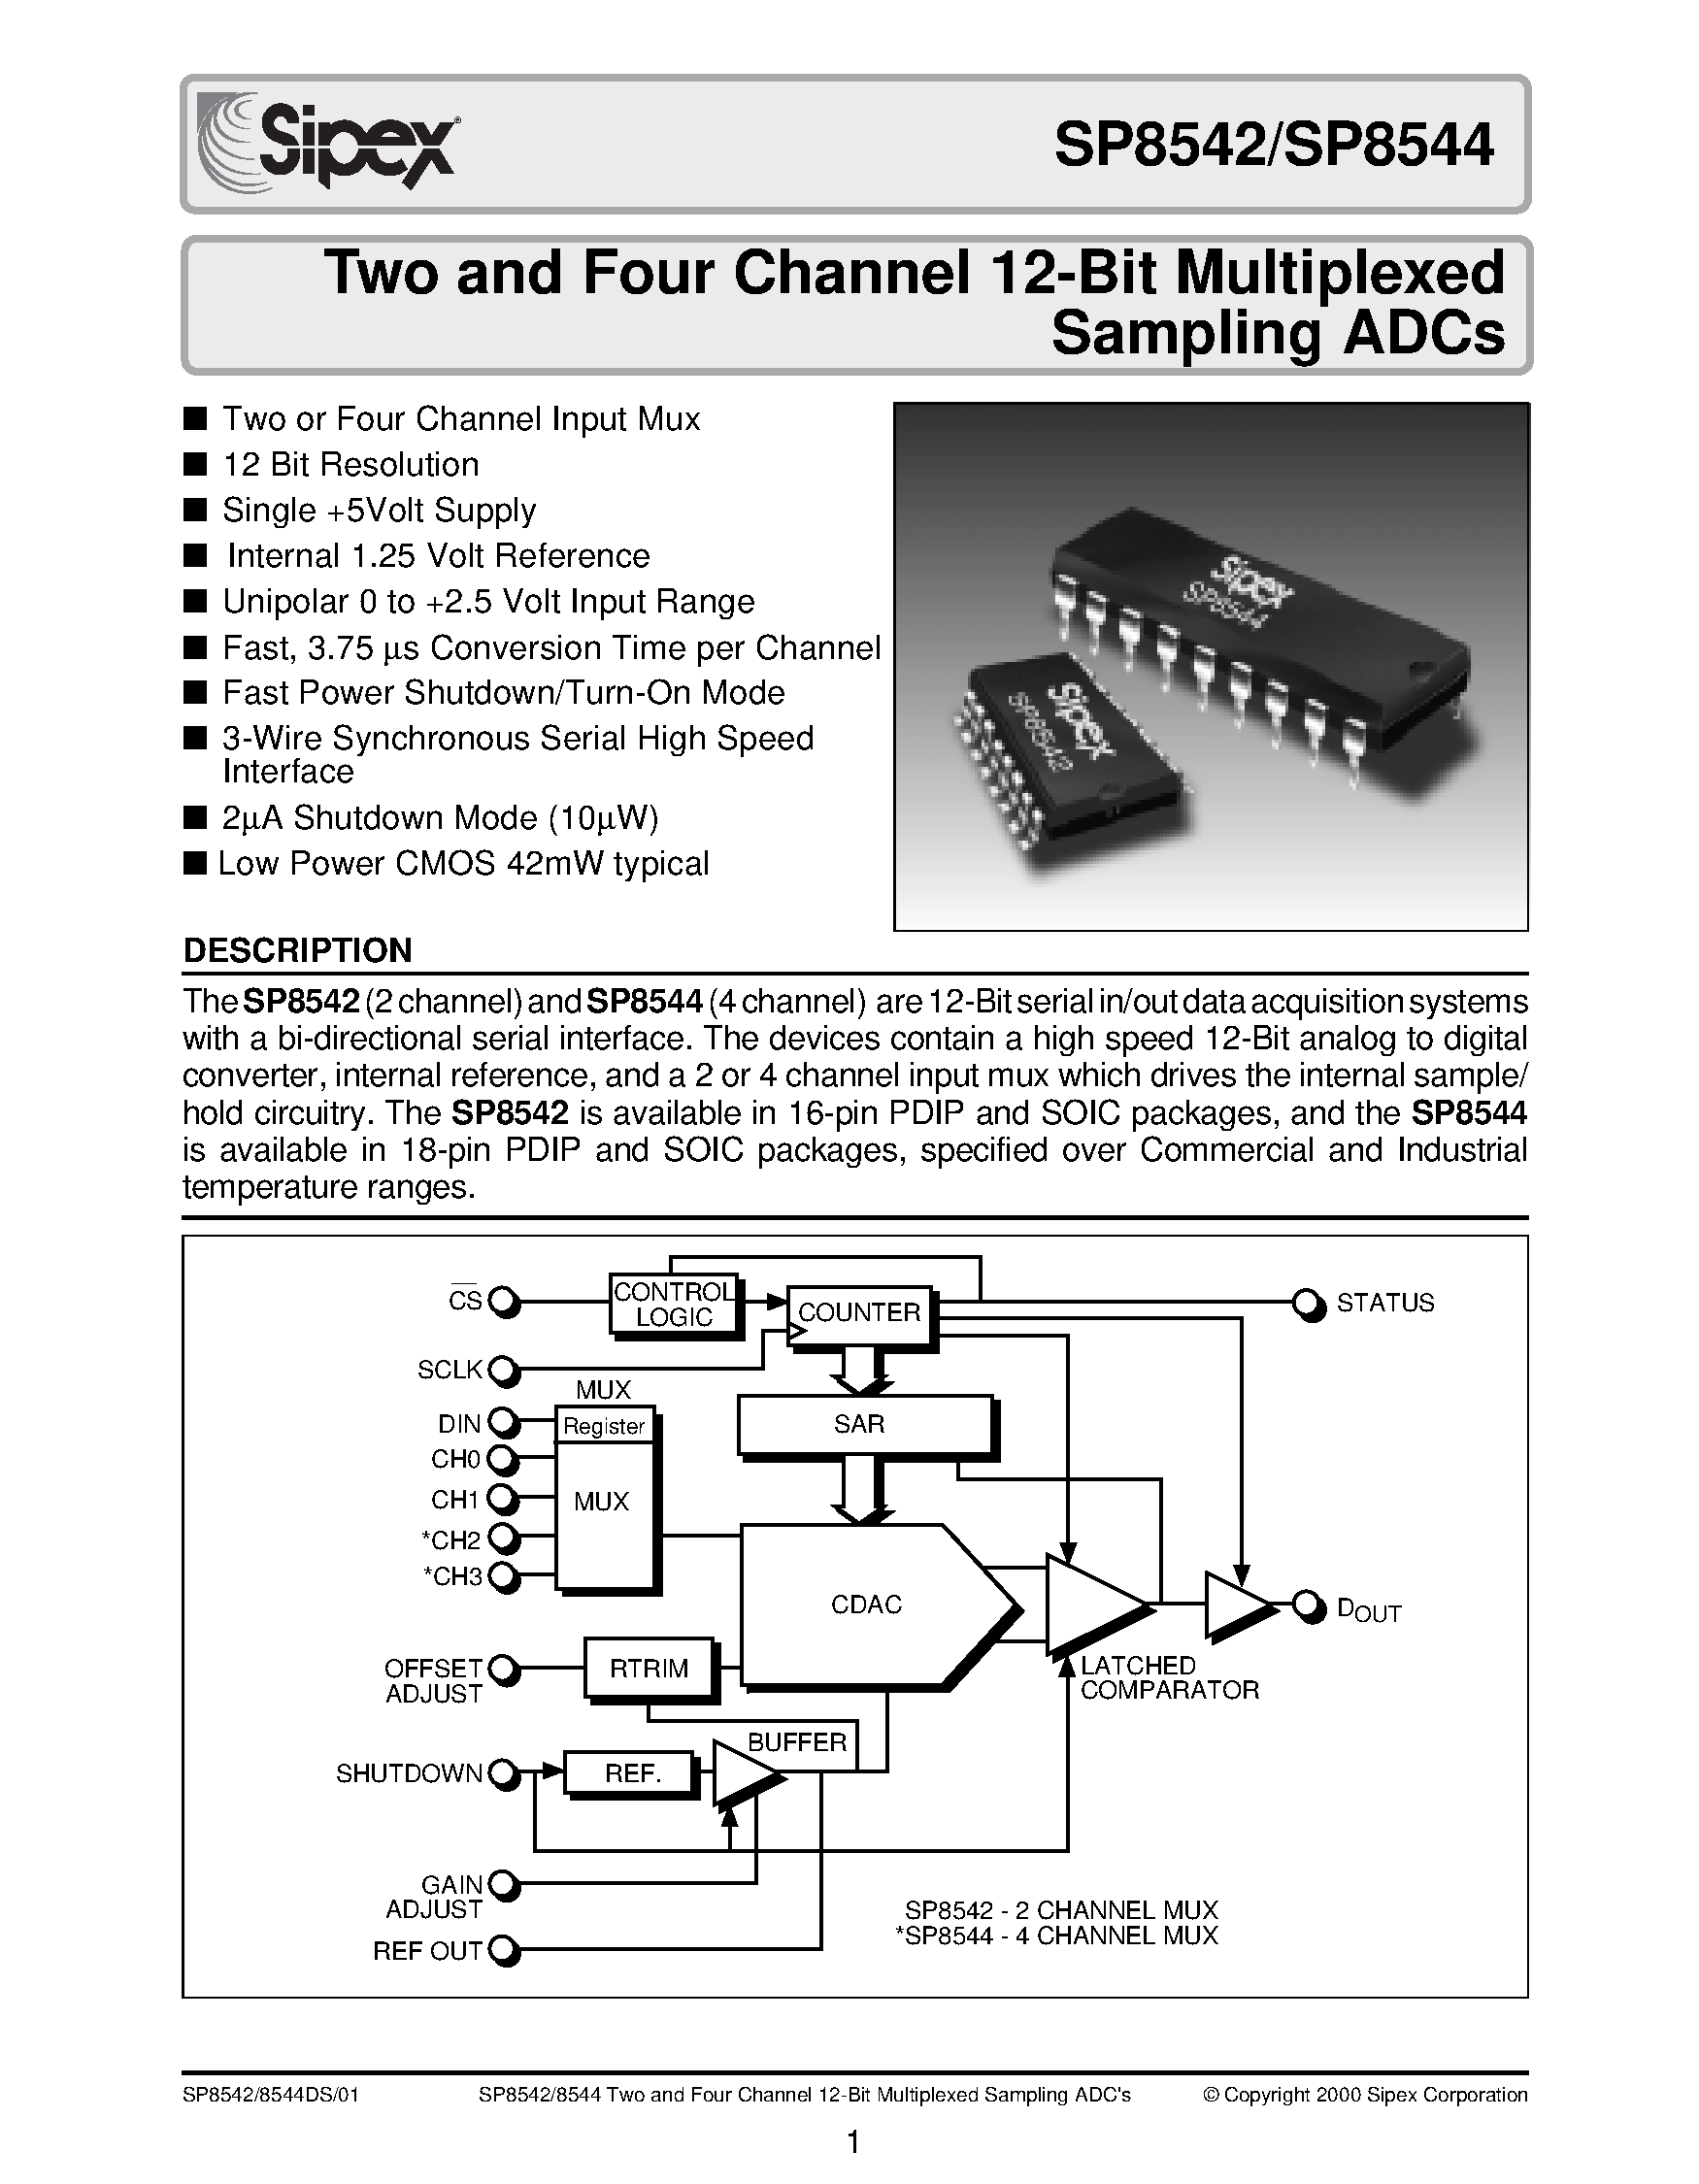 Datasheet SP8542KS - Two and Four Channel 12-Bit Multiplexed Sampling ADCs page 1